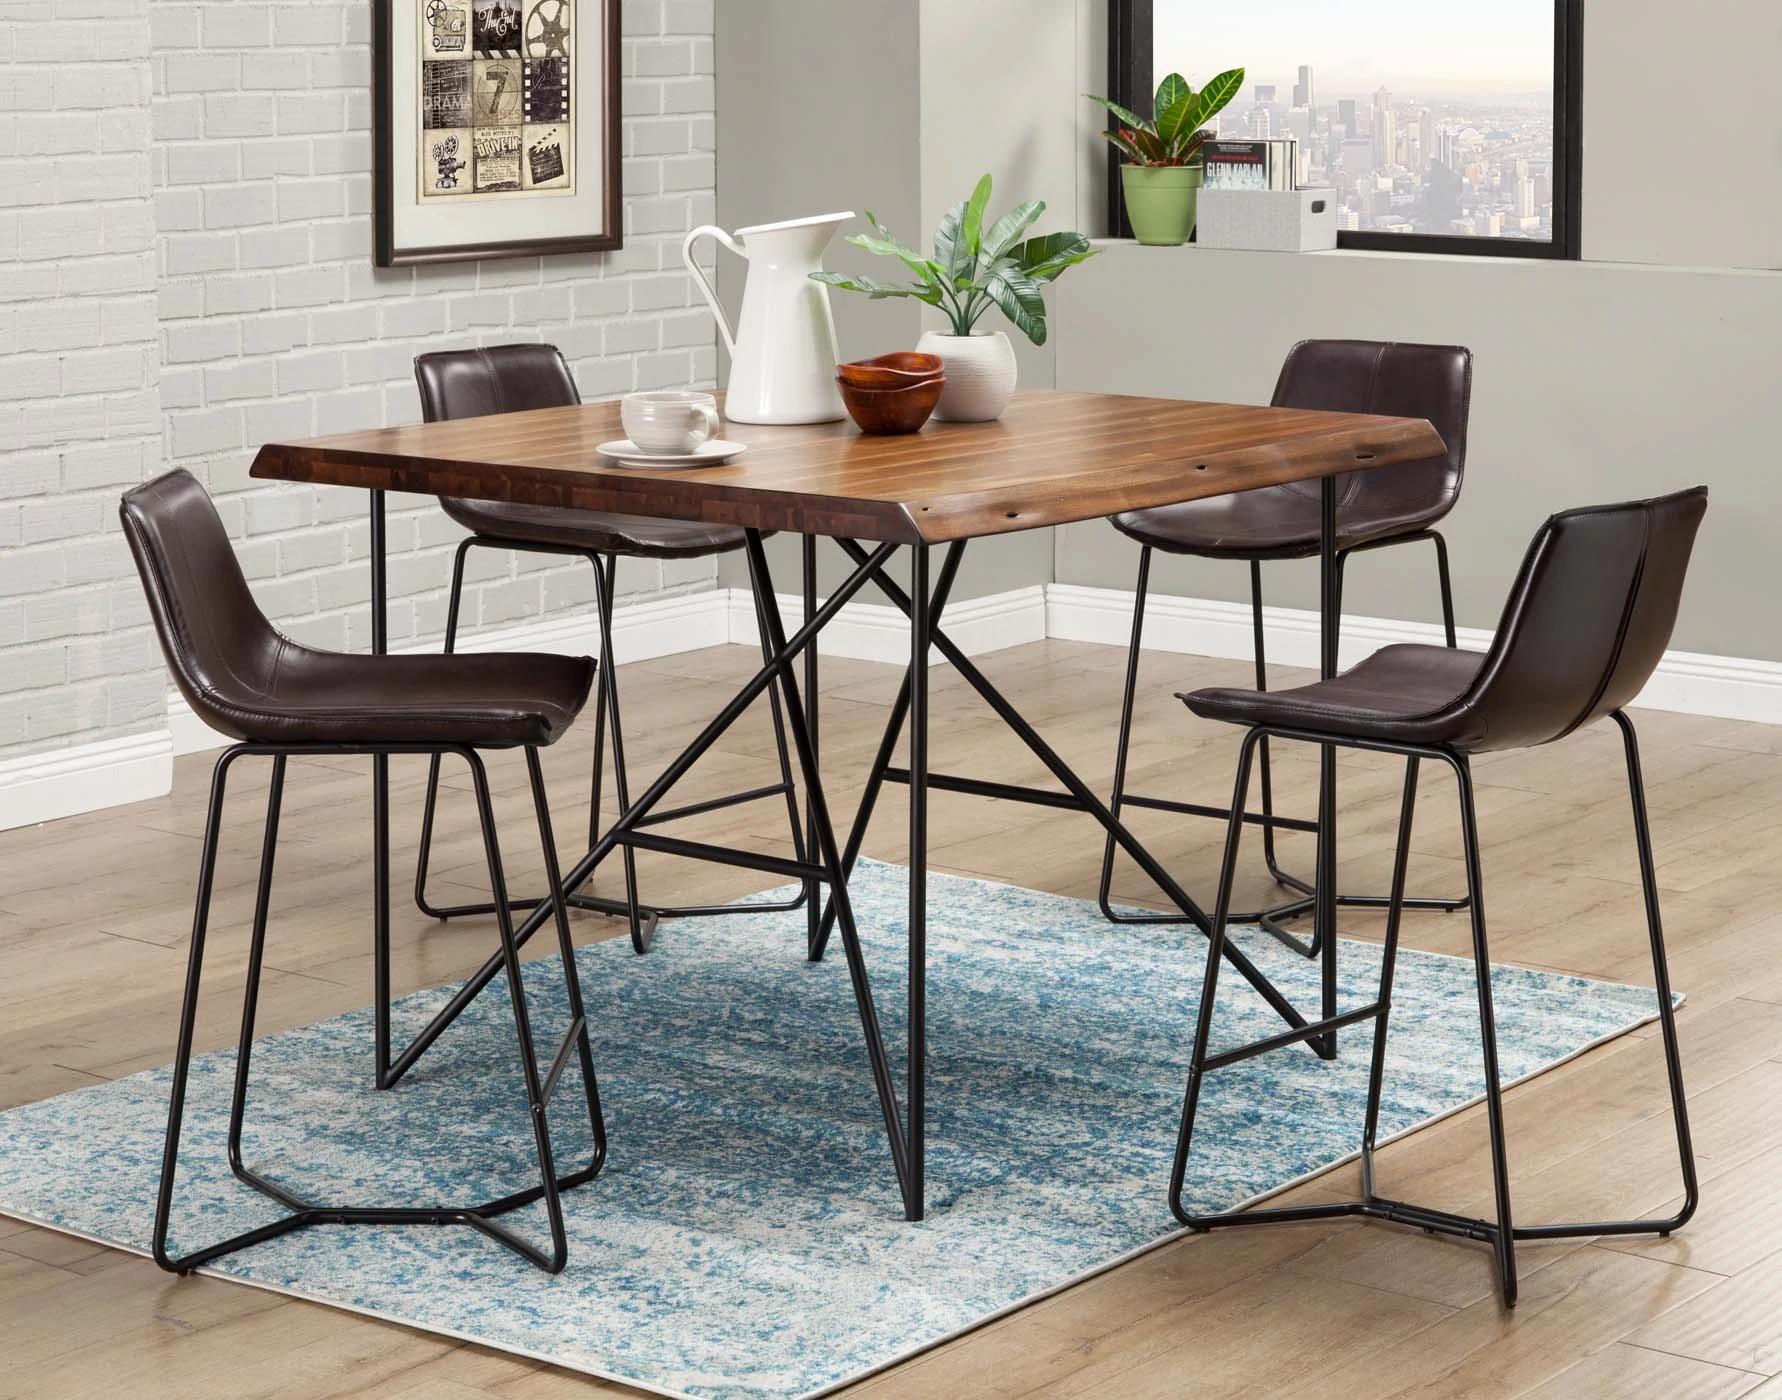 Contemporary, Rustic Dining Table Set LIVE EDGE 1968-48-Set-5 in Dark Brown, Walnut, Black Bonded Leather